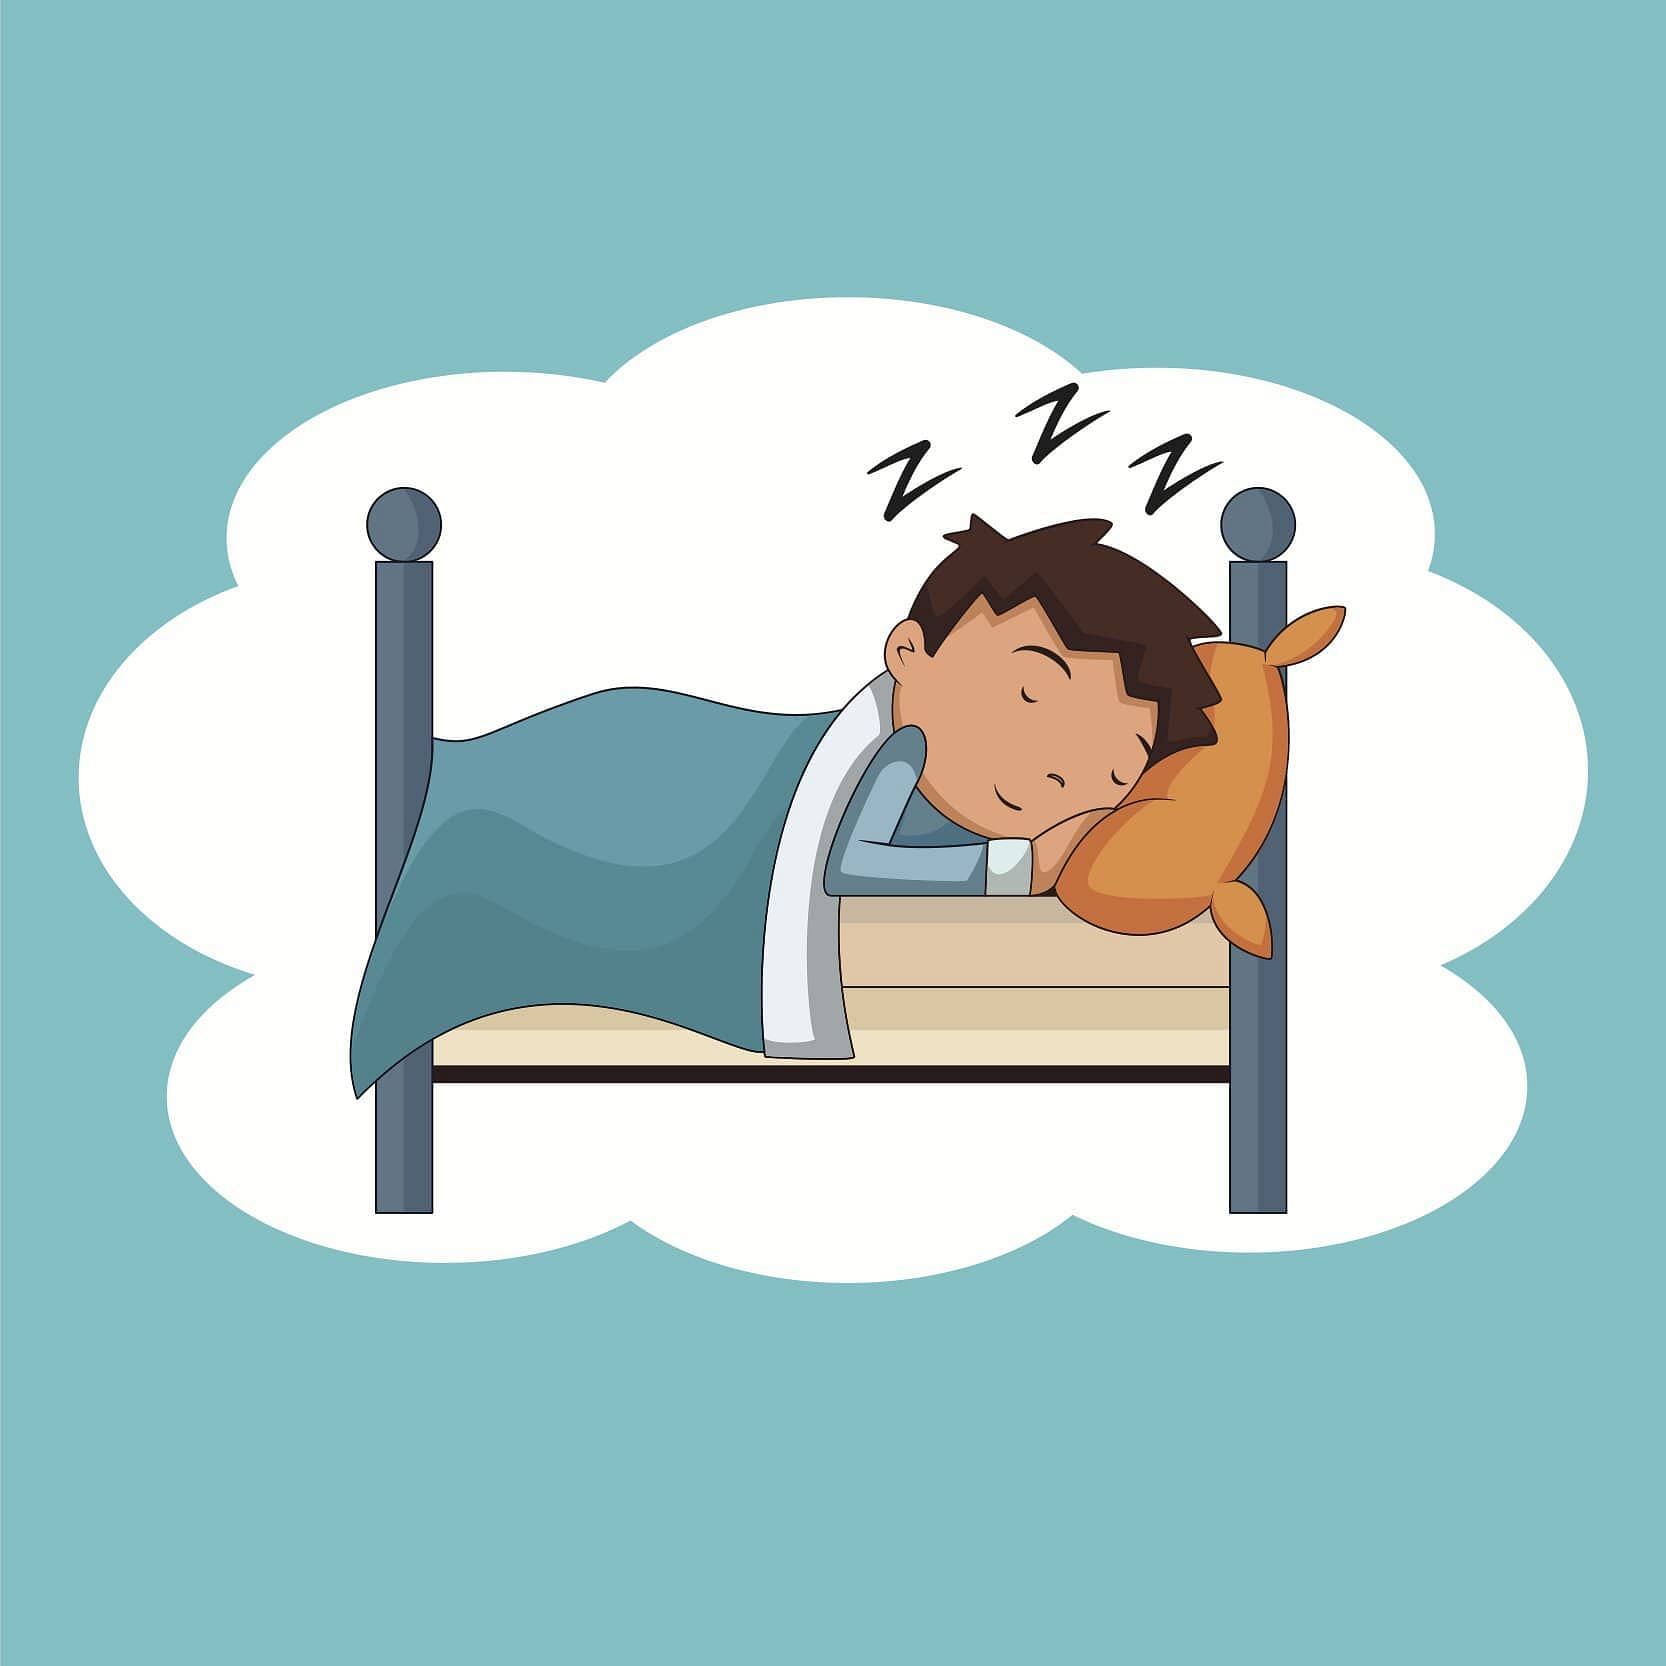 Enough sleep is important for mental health (Image source/ Vermont Public)